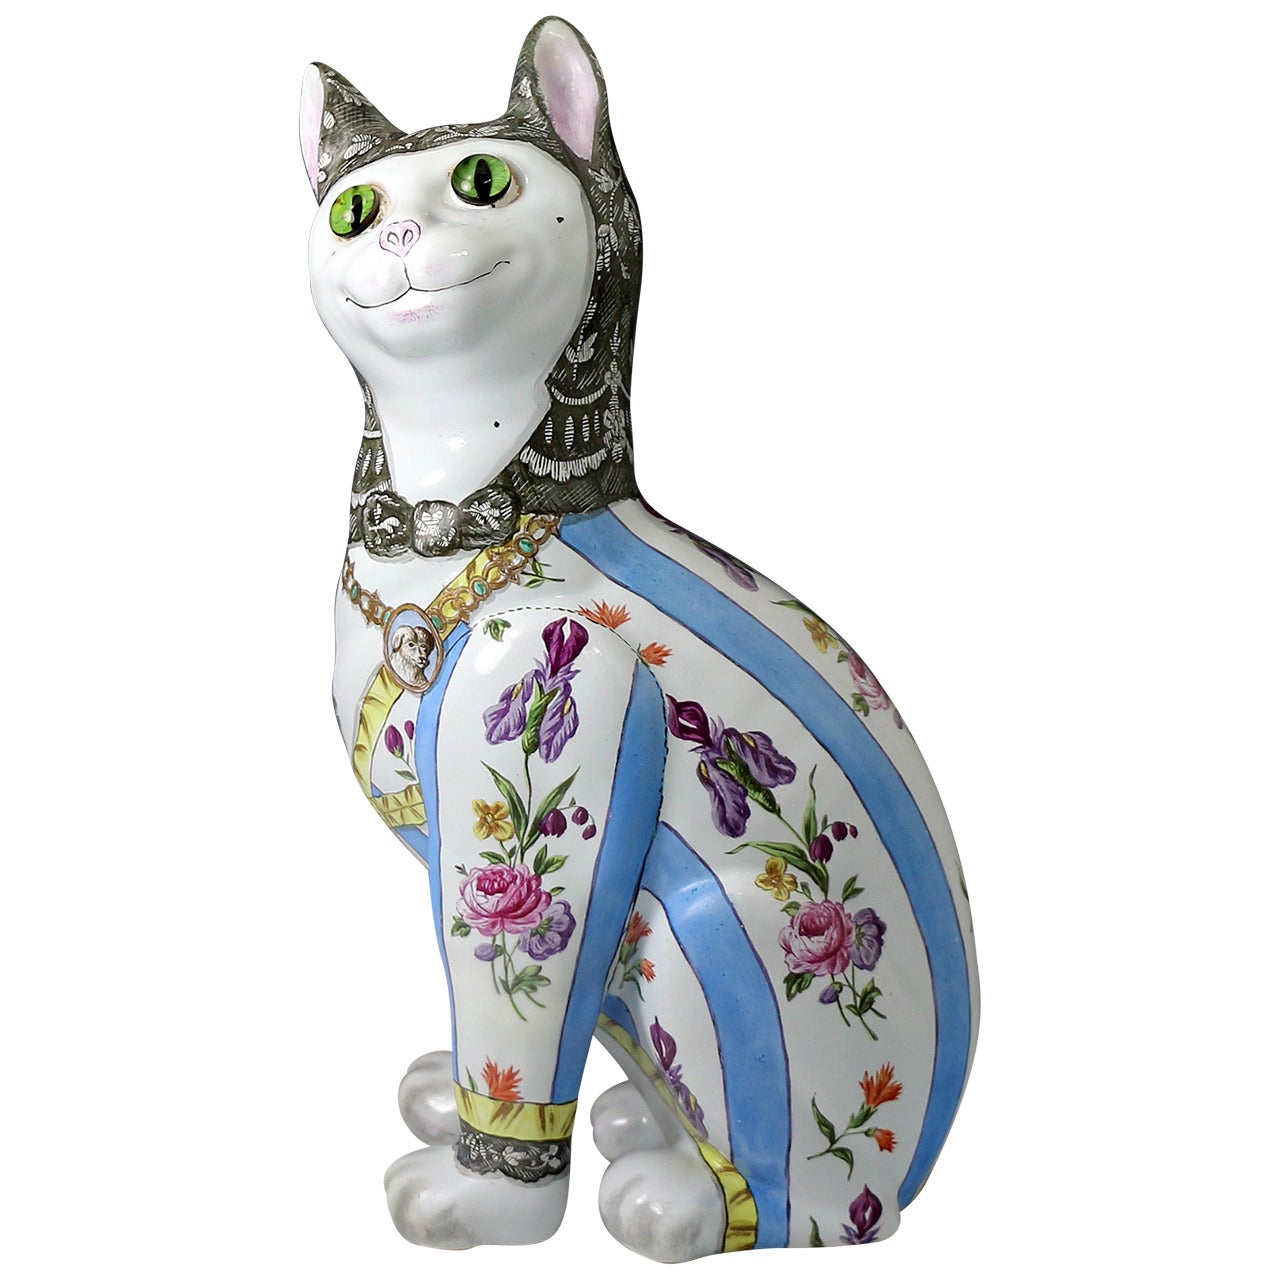 Emile Galle of Nancy Pottery Figures of a Seated Cat with Glass Eyes, circa 1900